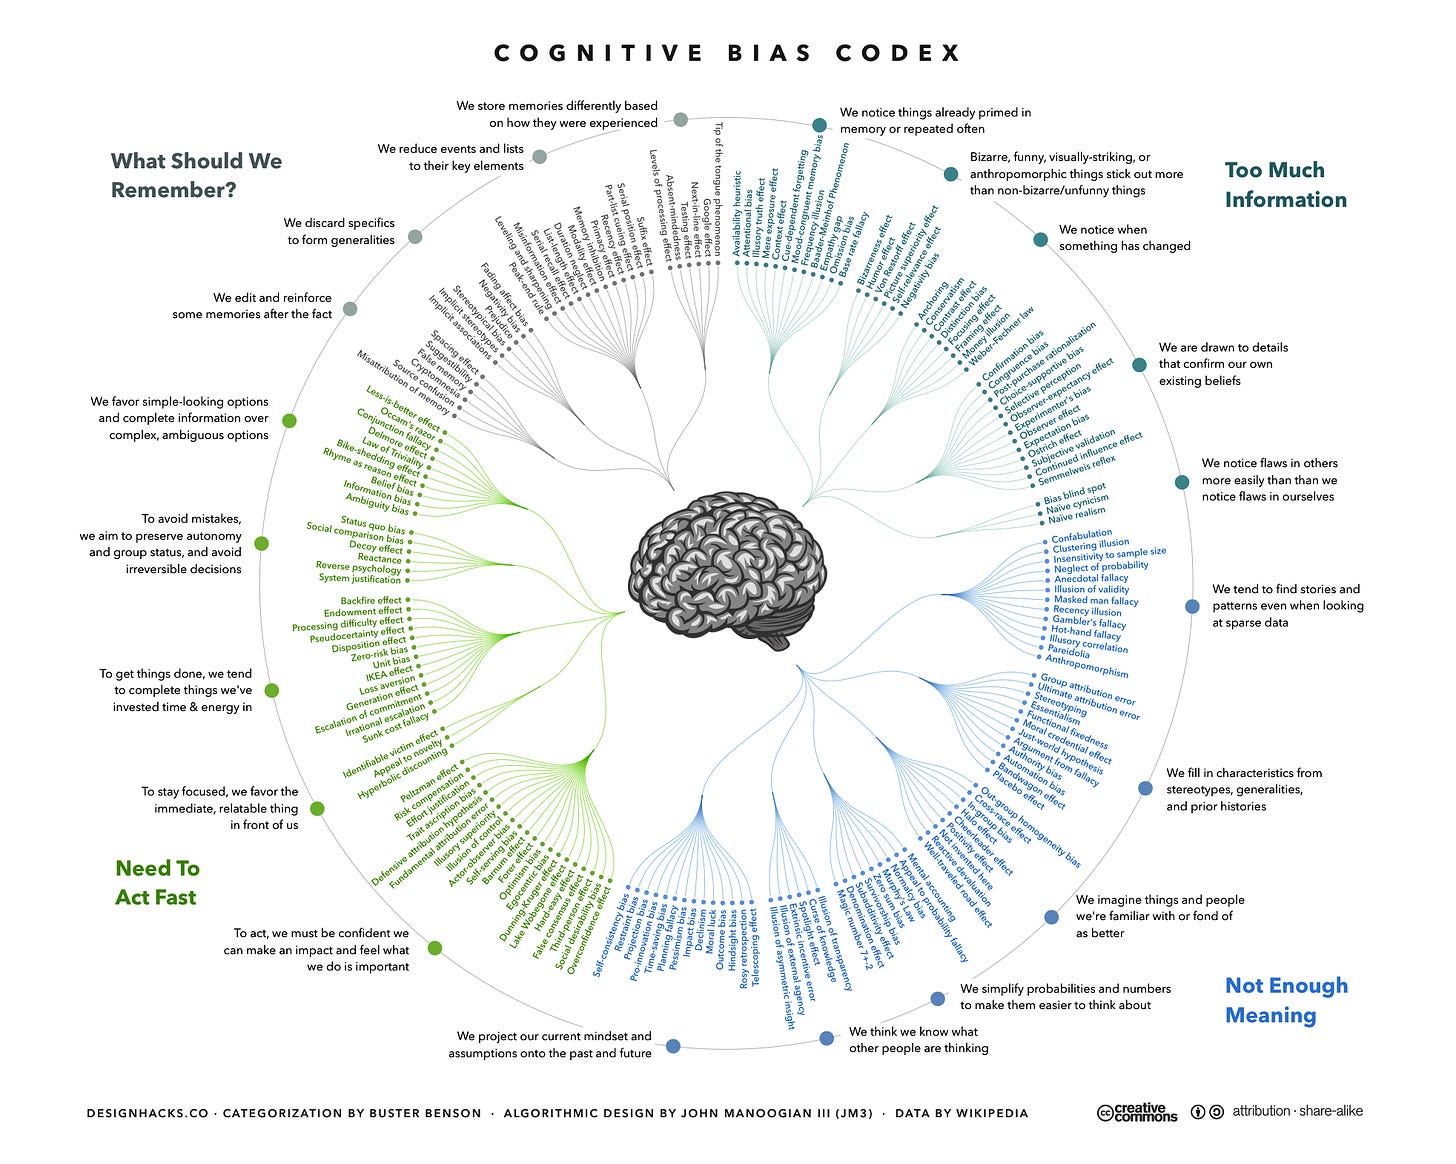 Fichier:The Cognitive Bias Codex - 180+ biases, designed by John Manoogian  III (jm3).png — Wikipédia